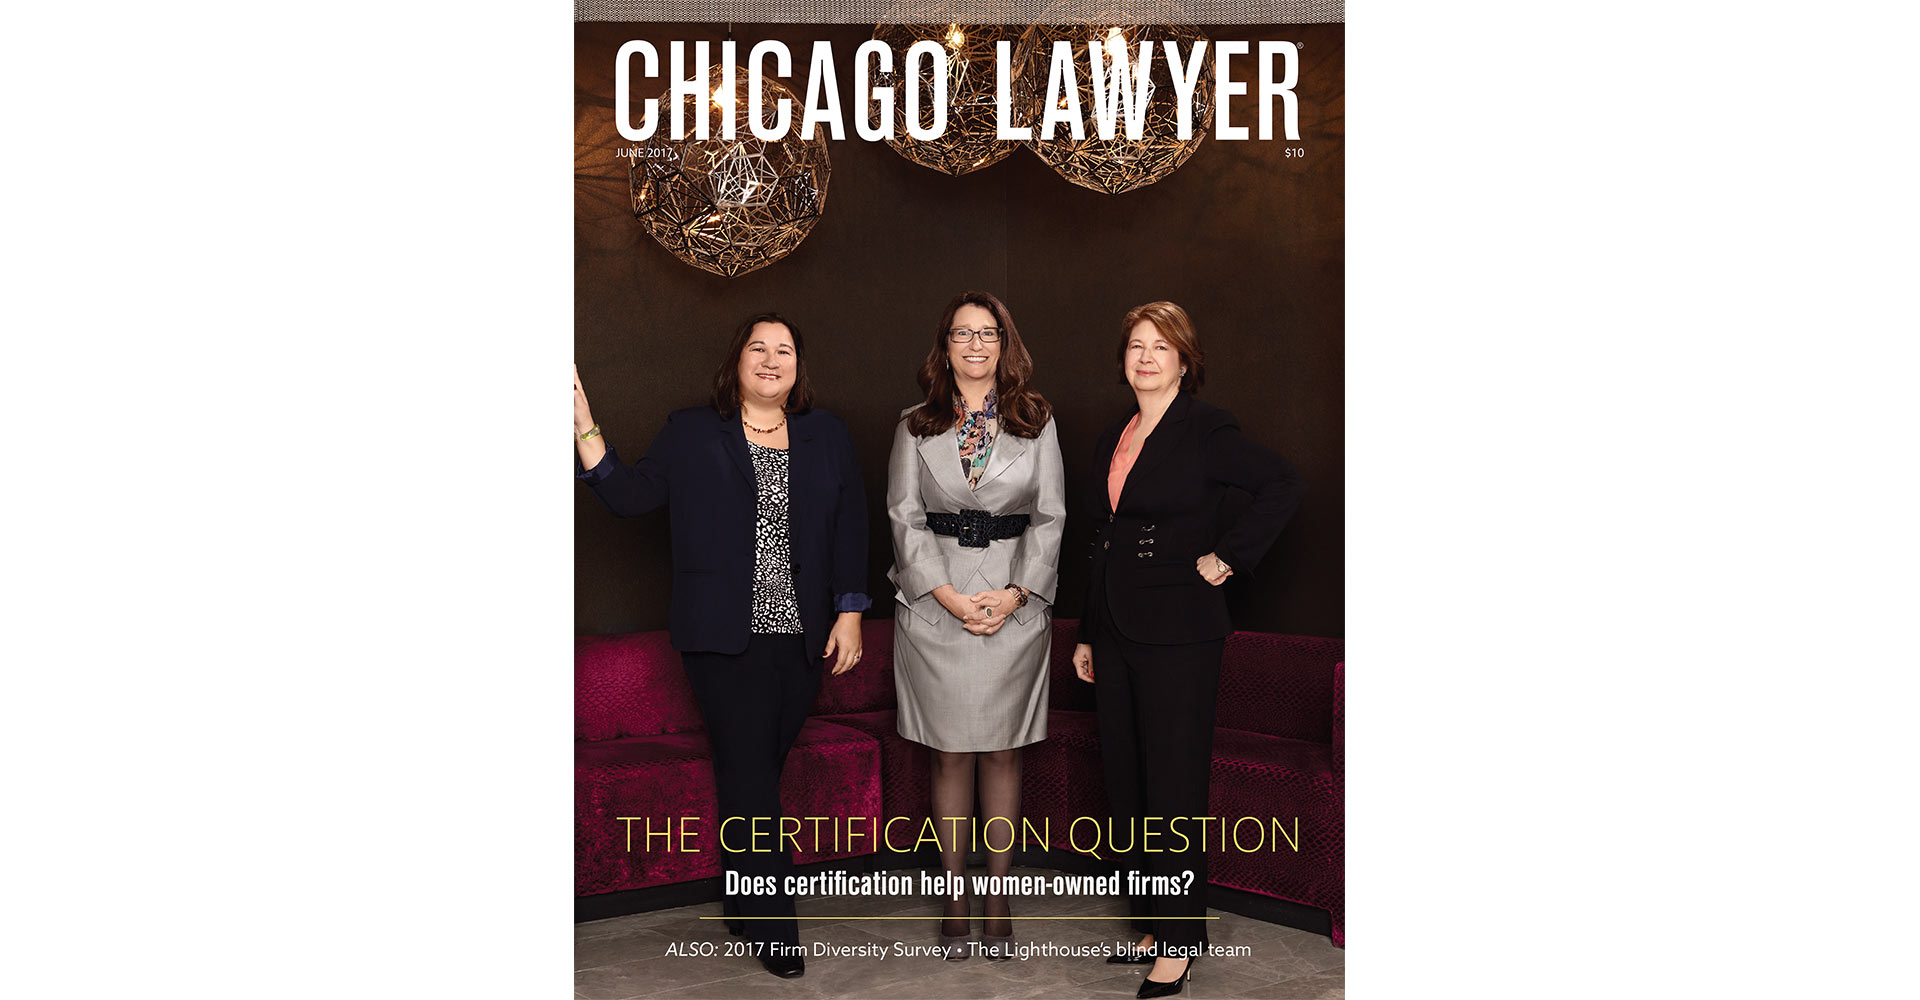 MANAGING MEMBER   JULIE BEYERS FEATURED IN CHICAGO LAWYER MAGAZINE